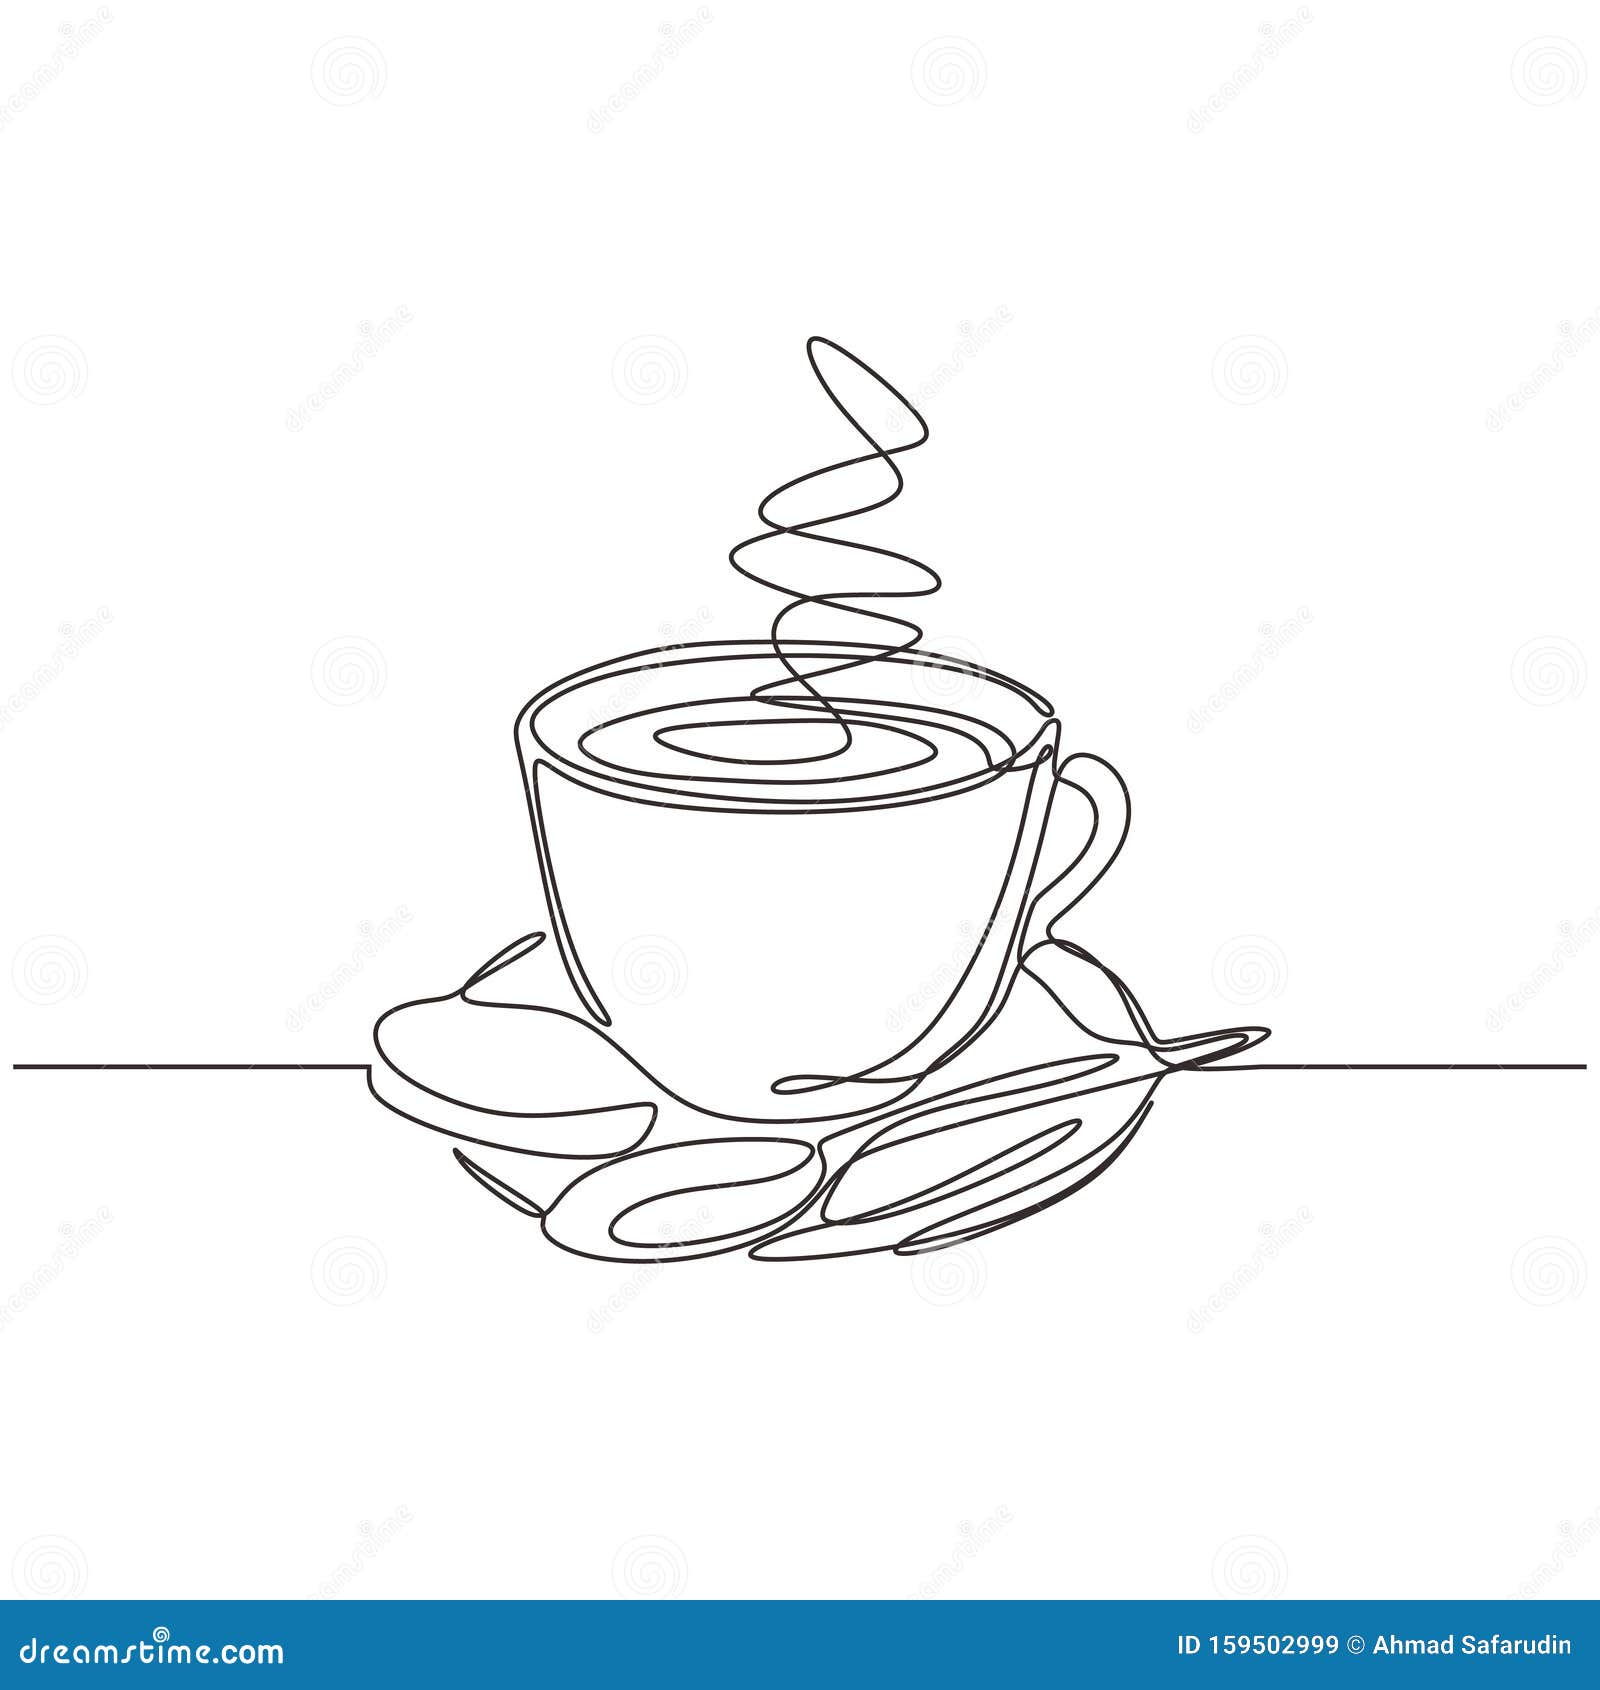 Cup And Saucer Pencil Drawing | Pencil drawing images, Pencil drawings,  Starbucks cup drawing